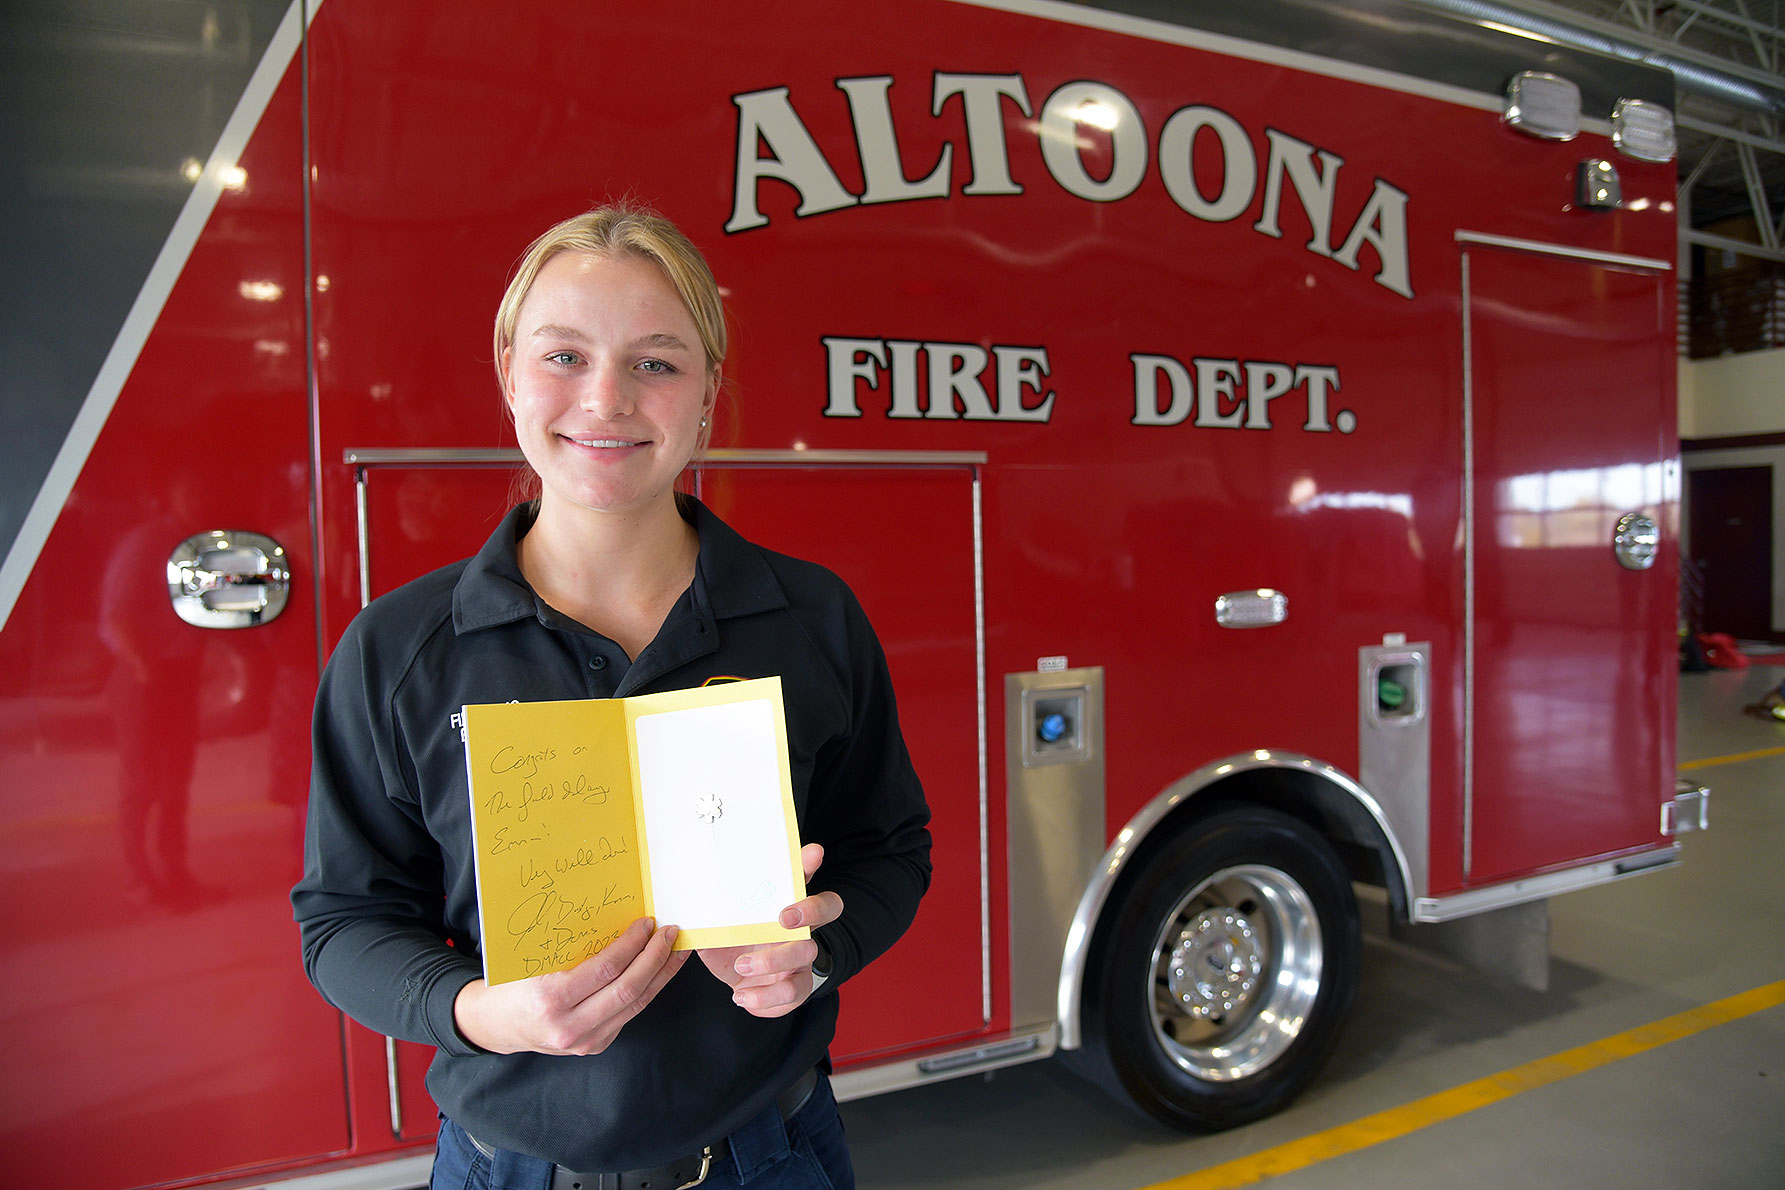 Kolb earned her paramedic certification just 10 days before going out on the memorable call.